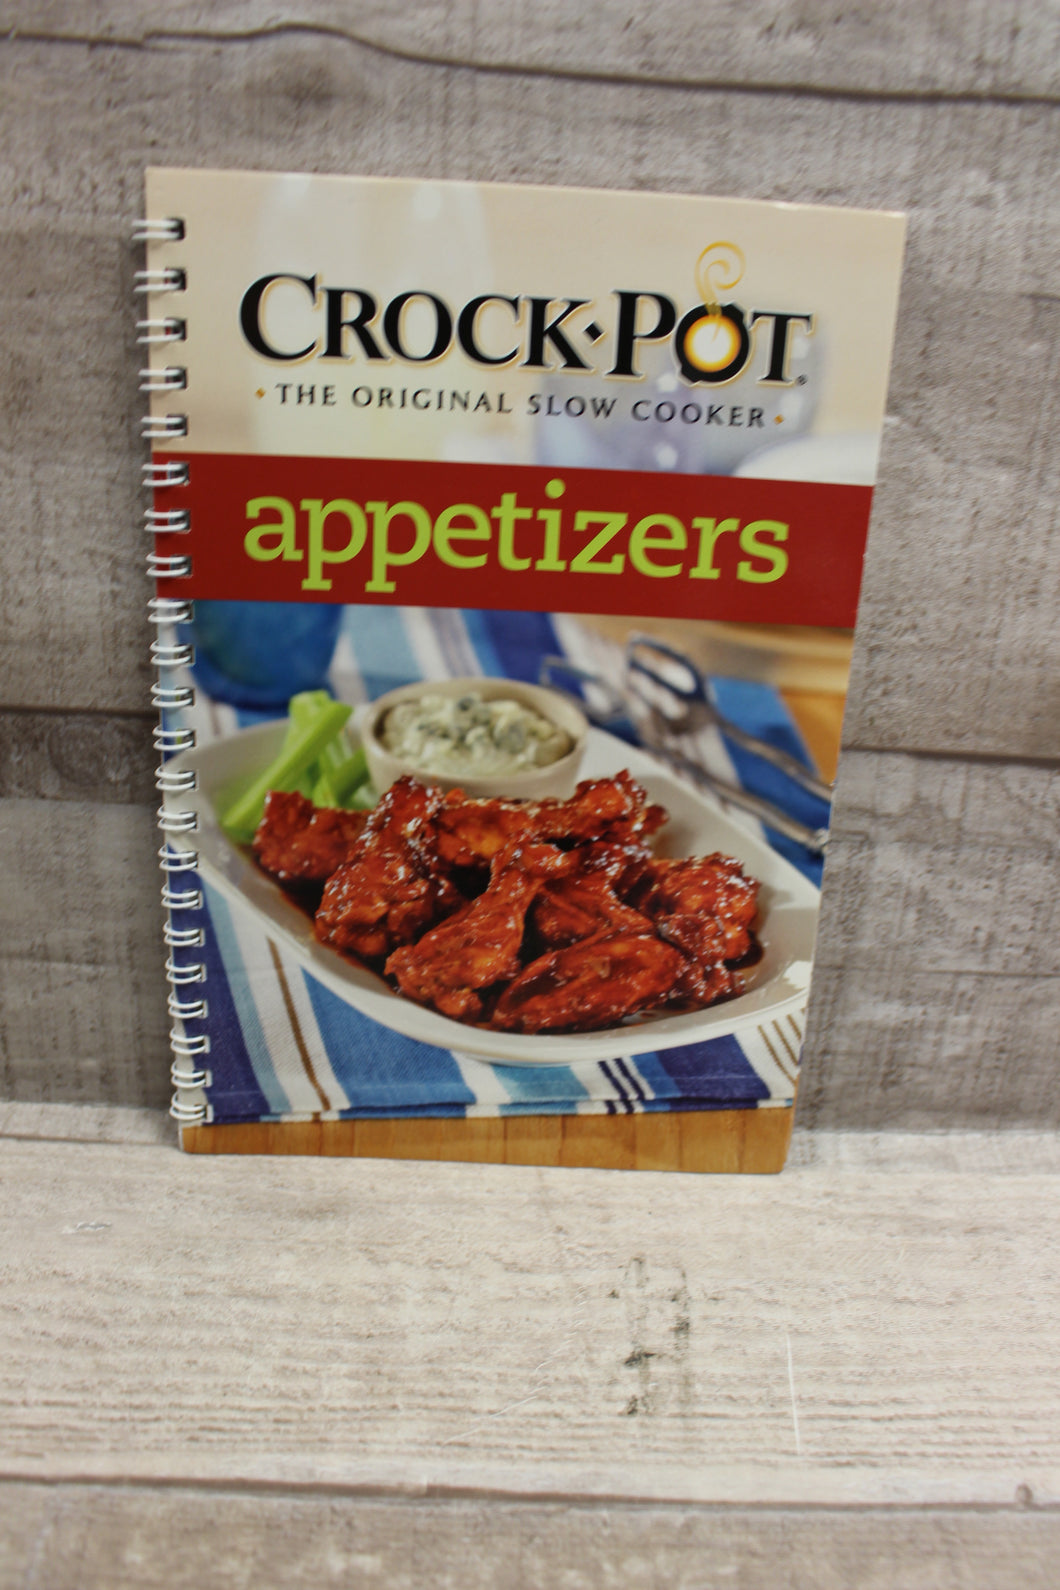 Crock Pot The Original Slow Cooker: Appetizers Book -Used